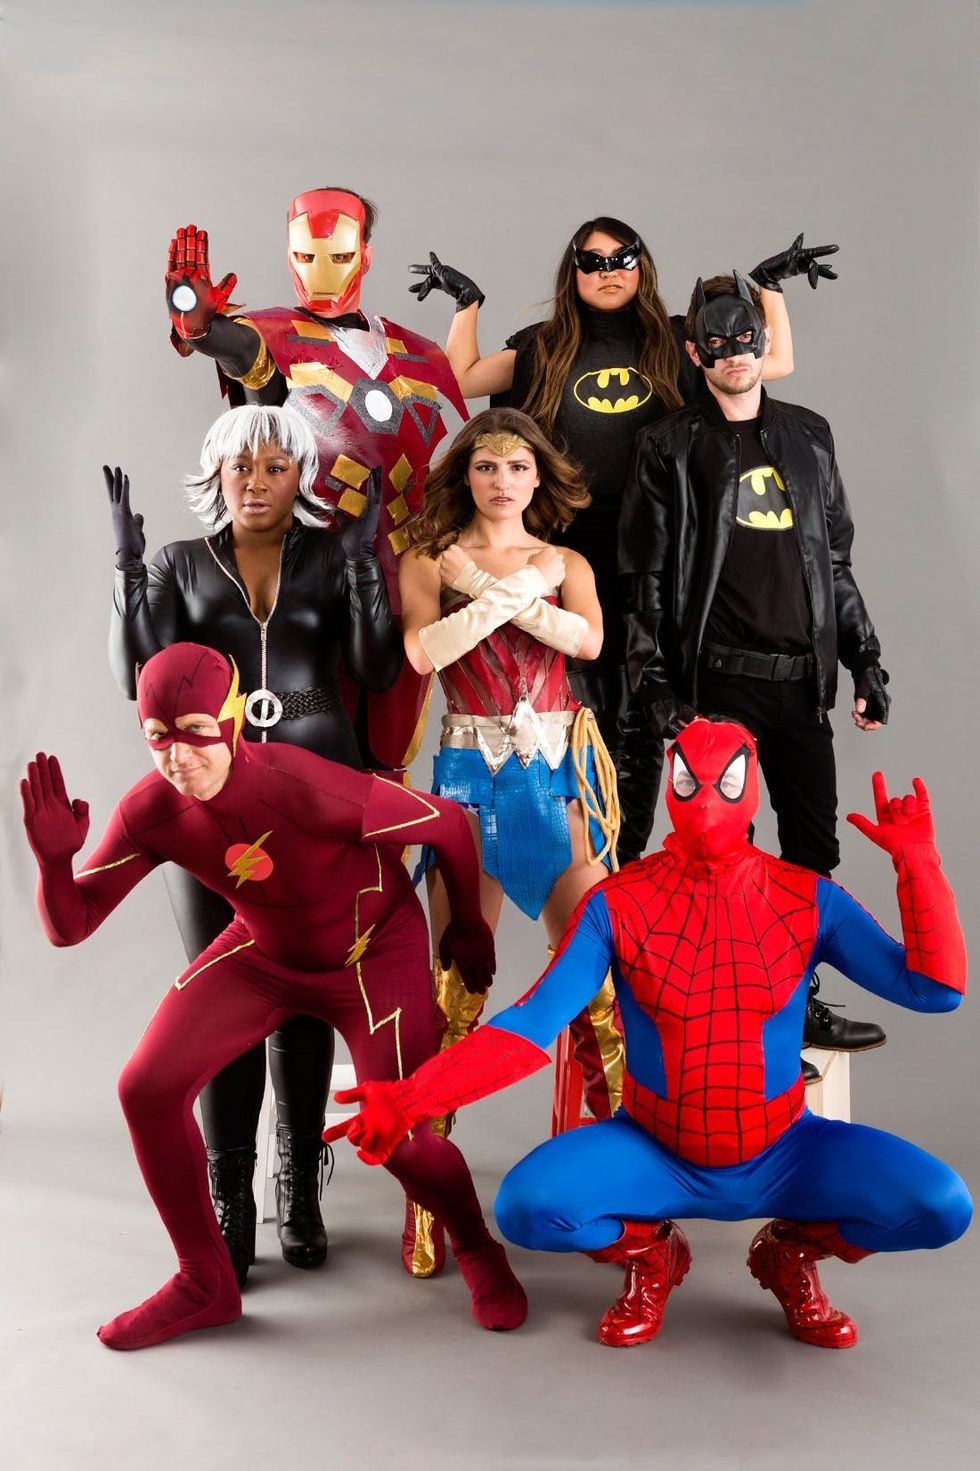 80 Group Halloween Costume Ideas For The Win - Brit + Co